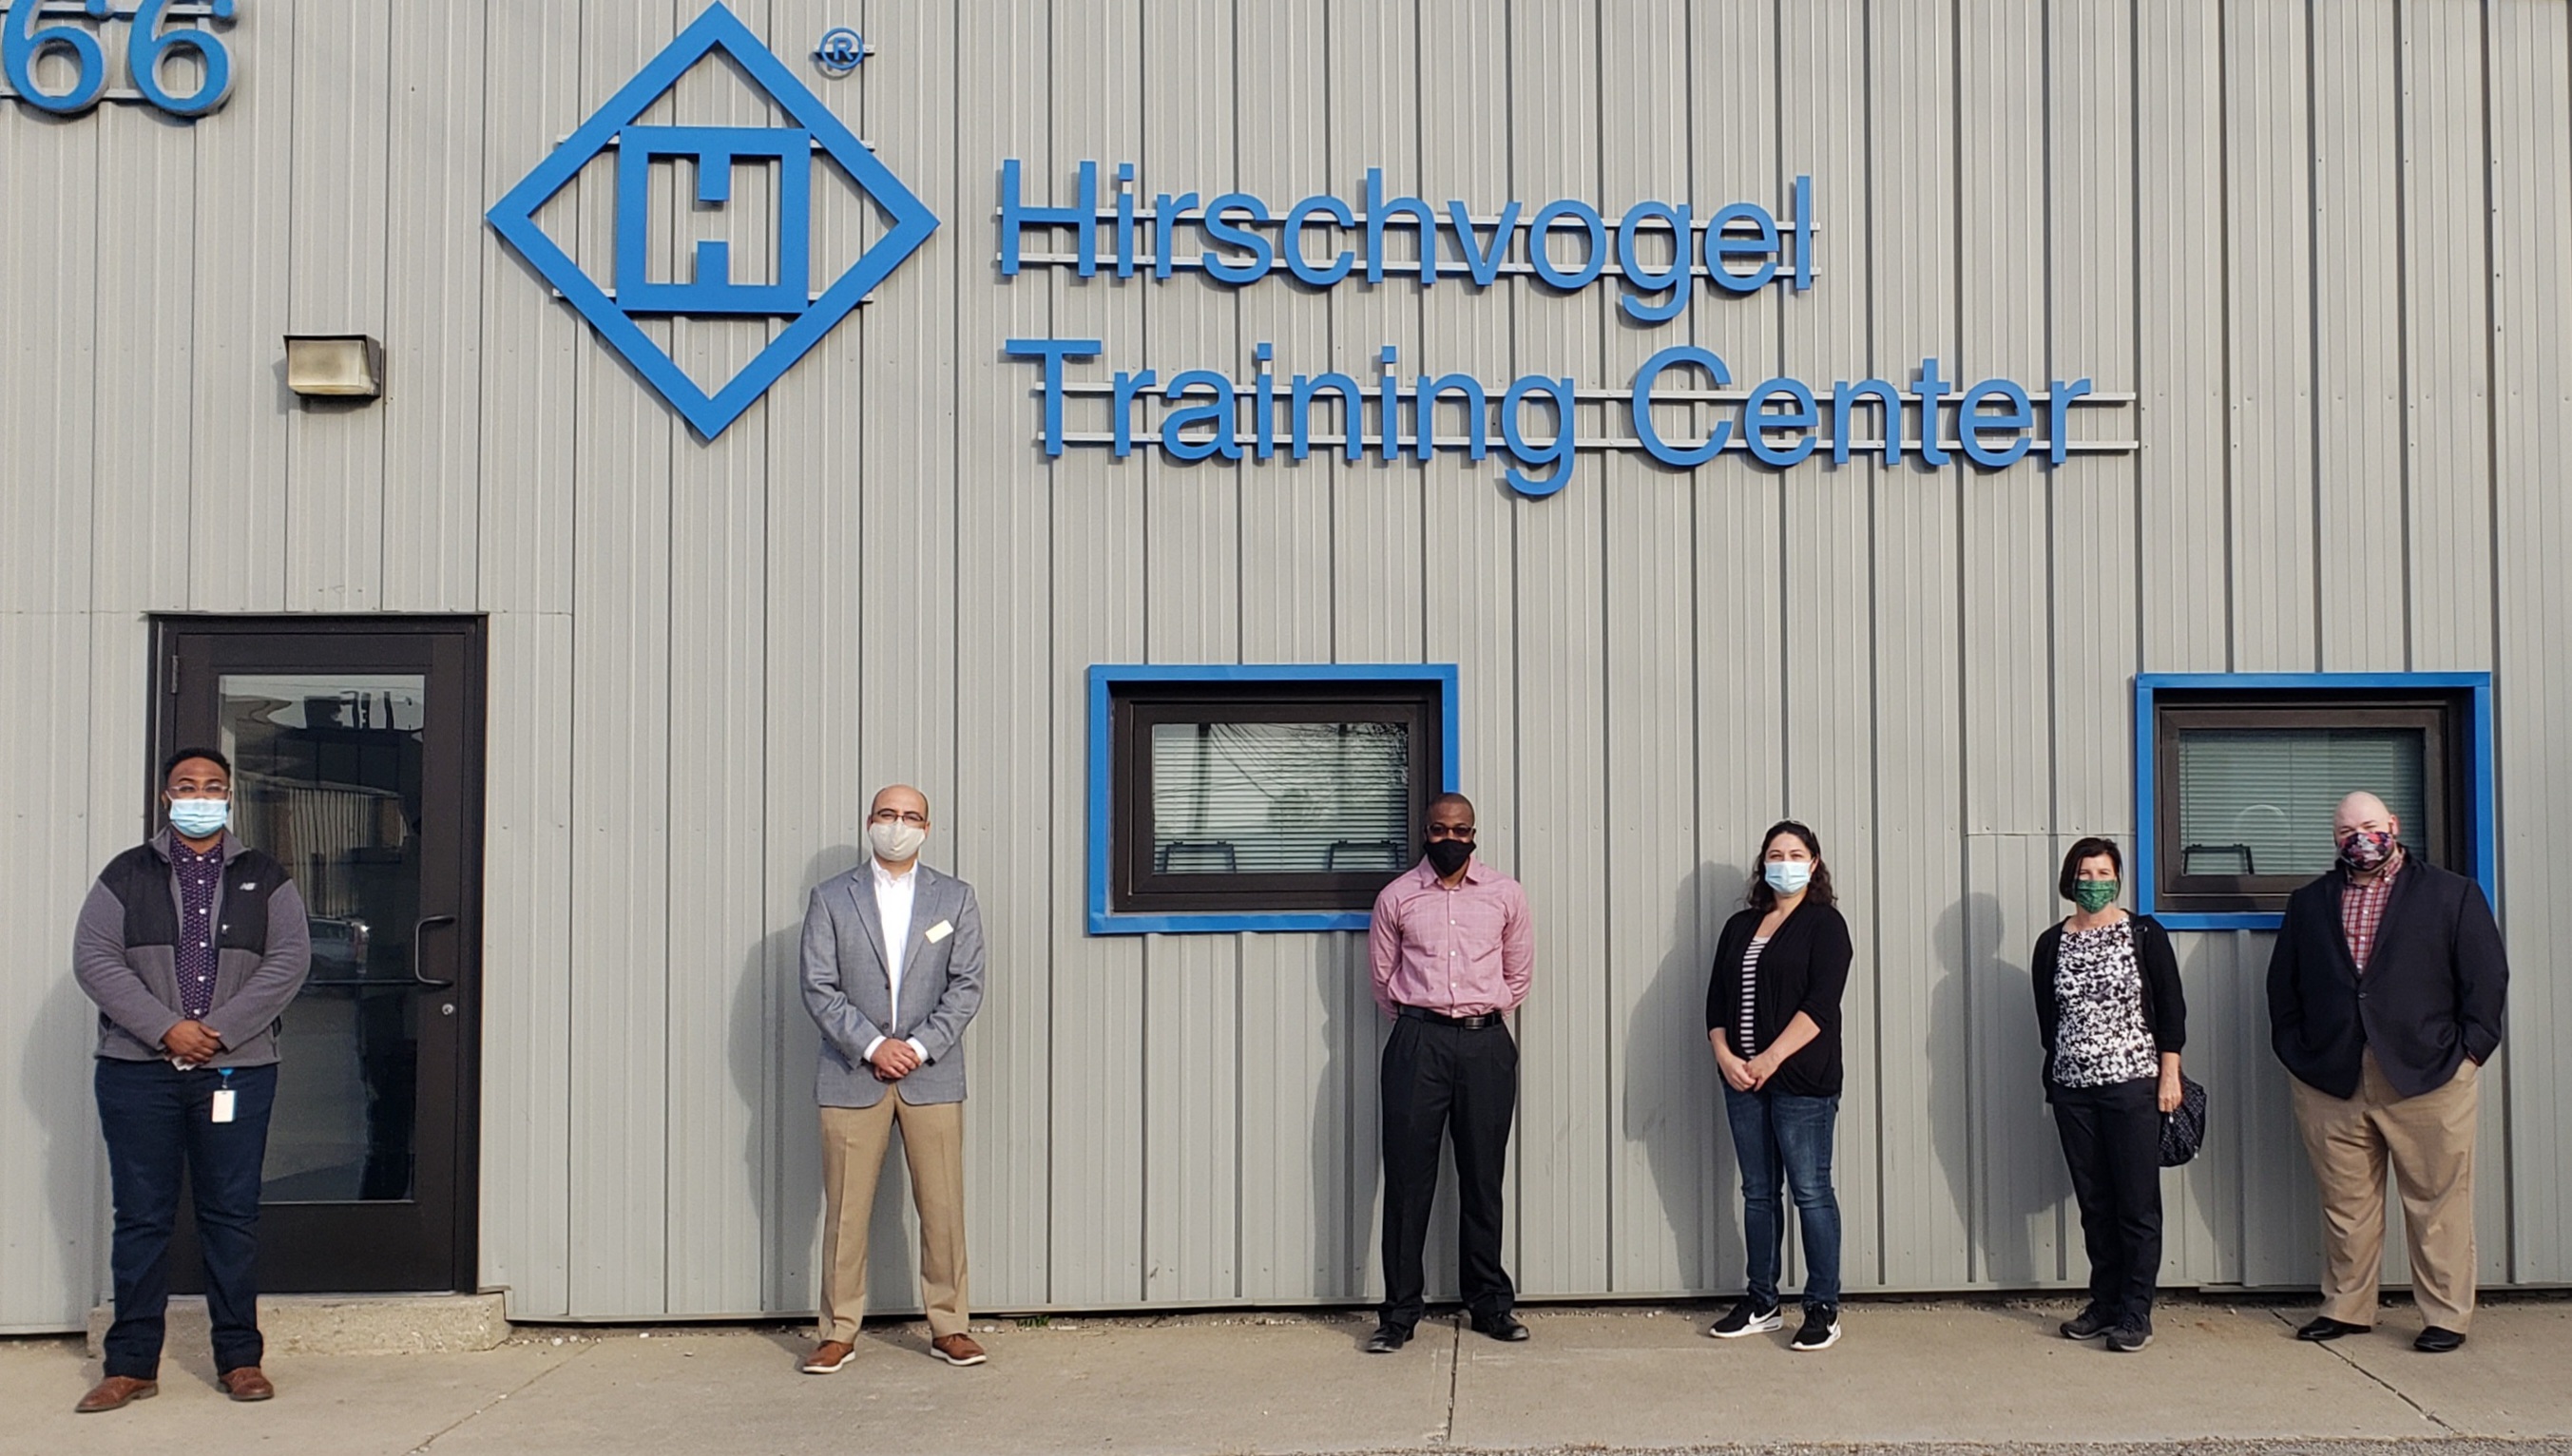 A picture of the two students, faculty member, and HR representatives from the company standing in front of the training center.